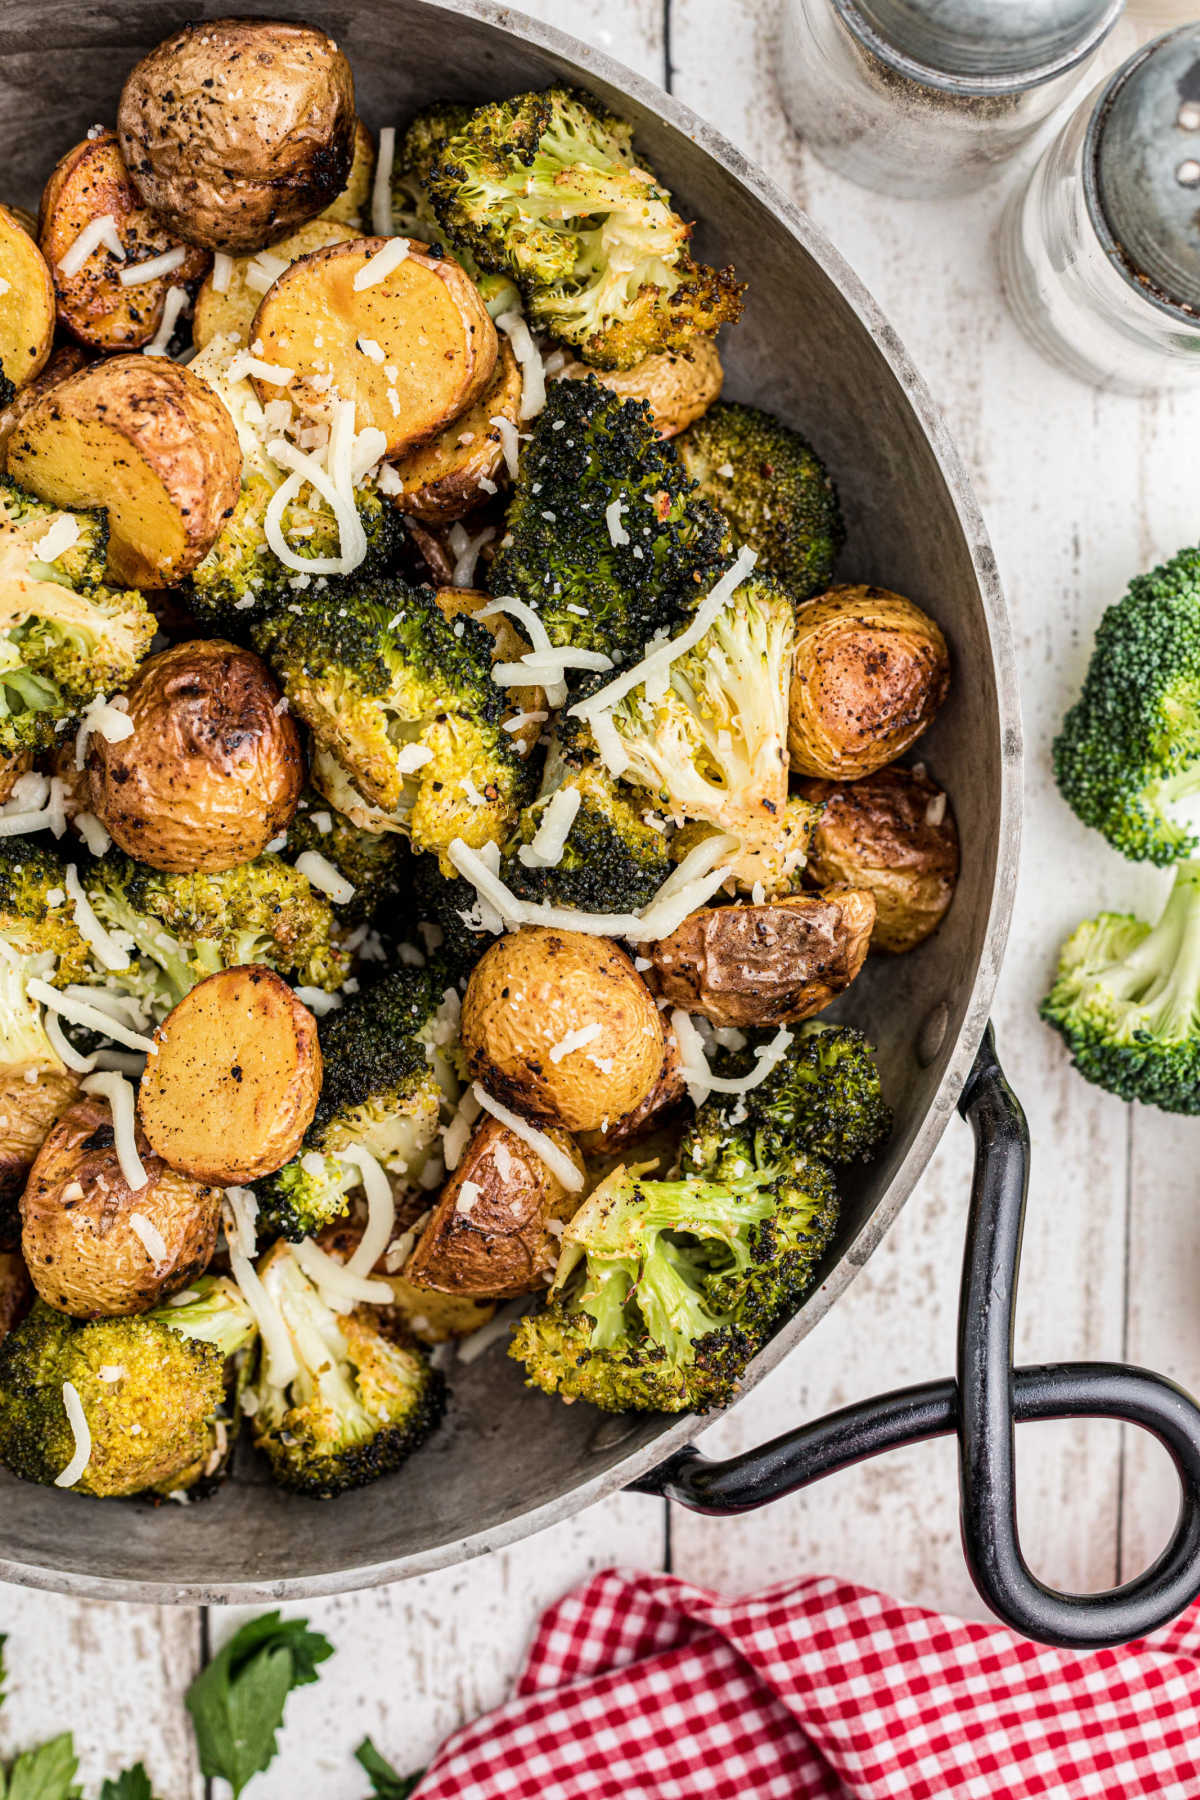 Overhead close up shot of a pan of roasted potatoes and broccoli.